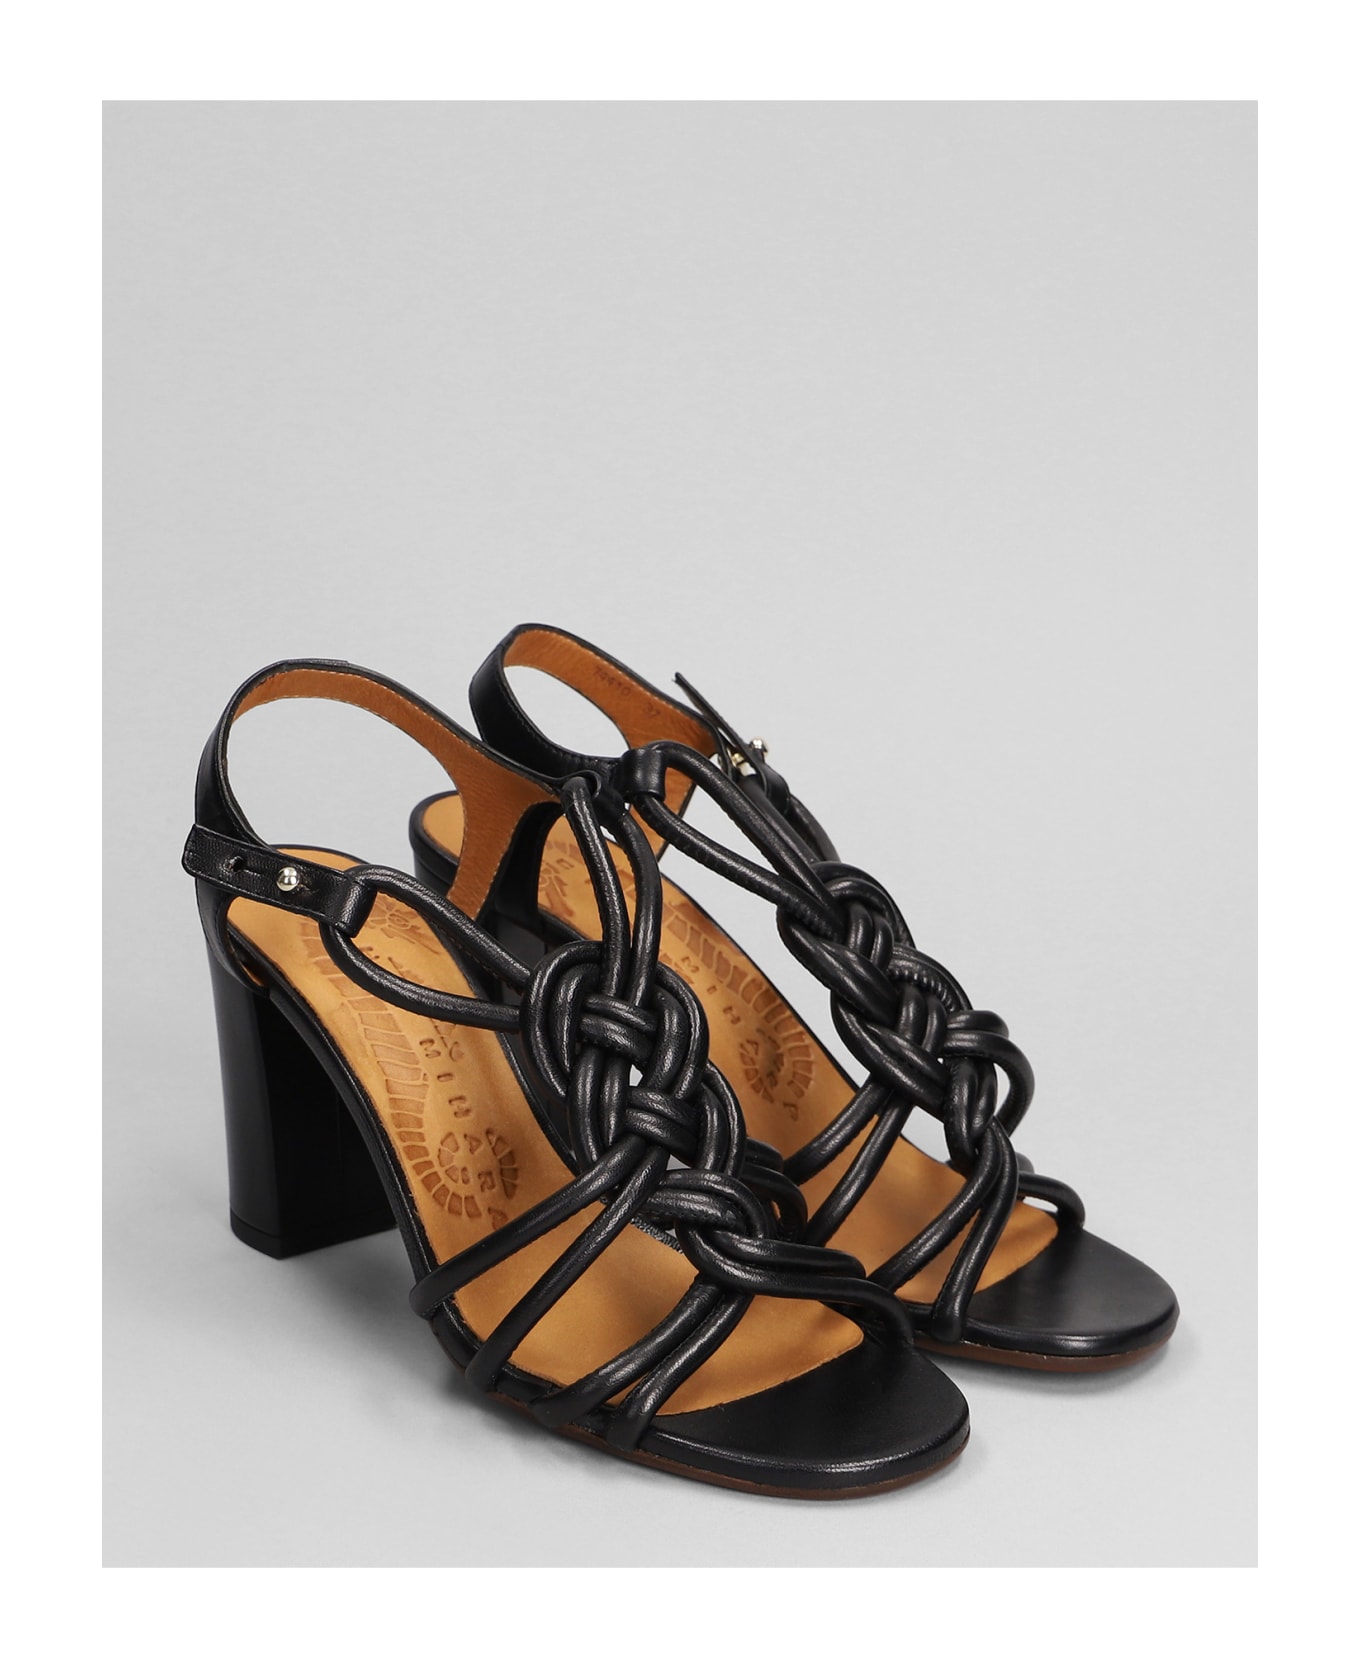 Chie Mihara Bane Sandals In Black Leather - black